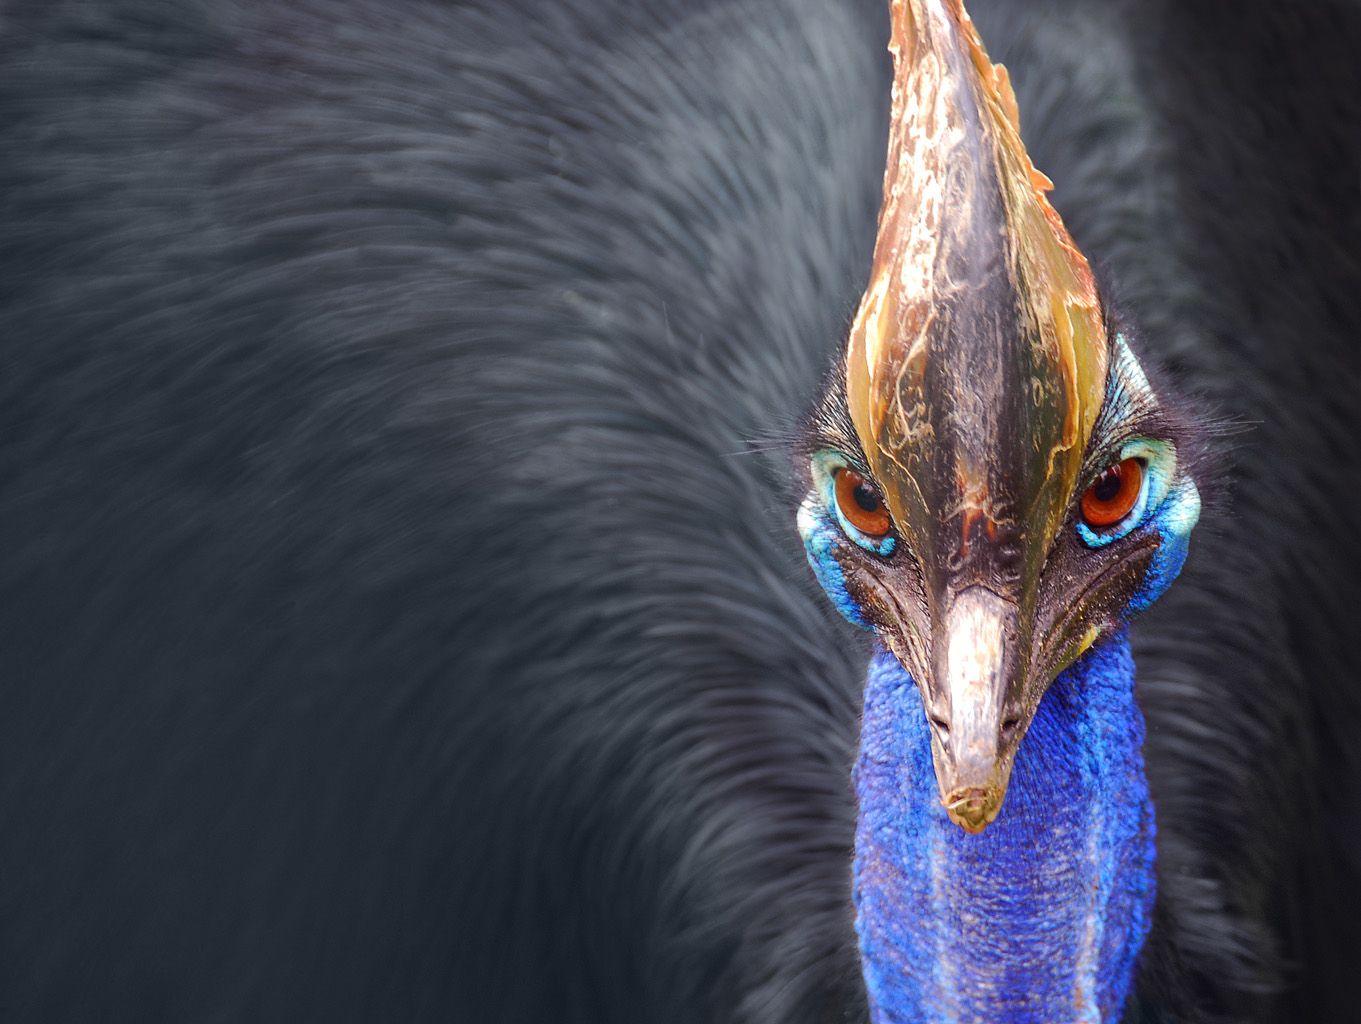 What's the Cassowary Project?